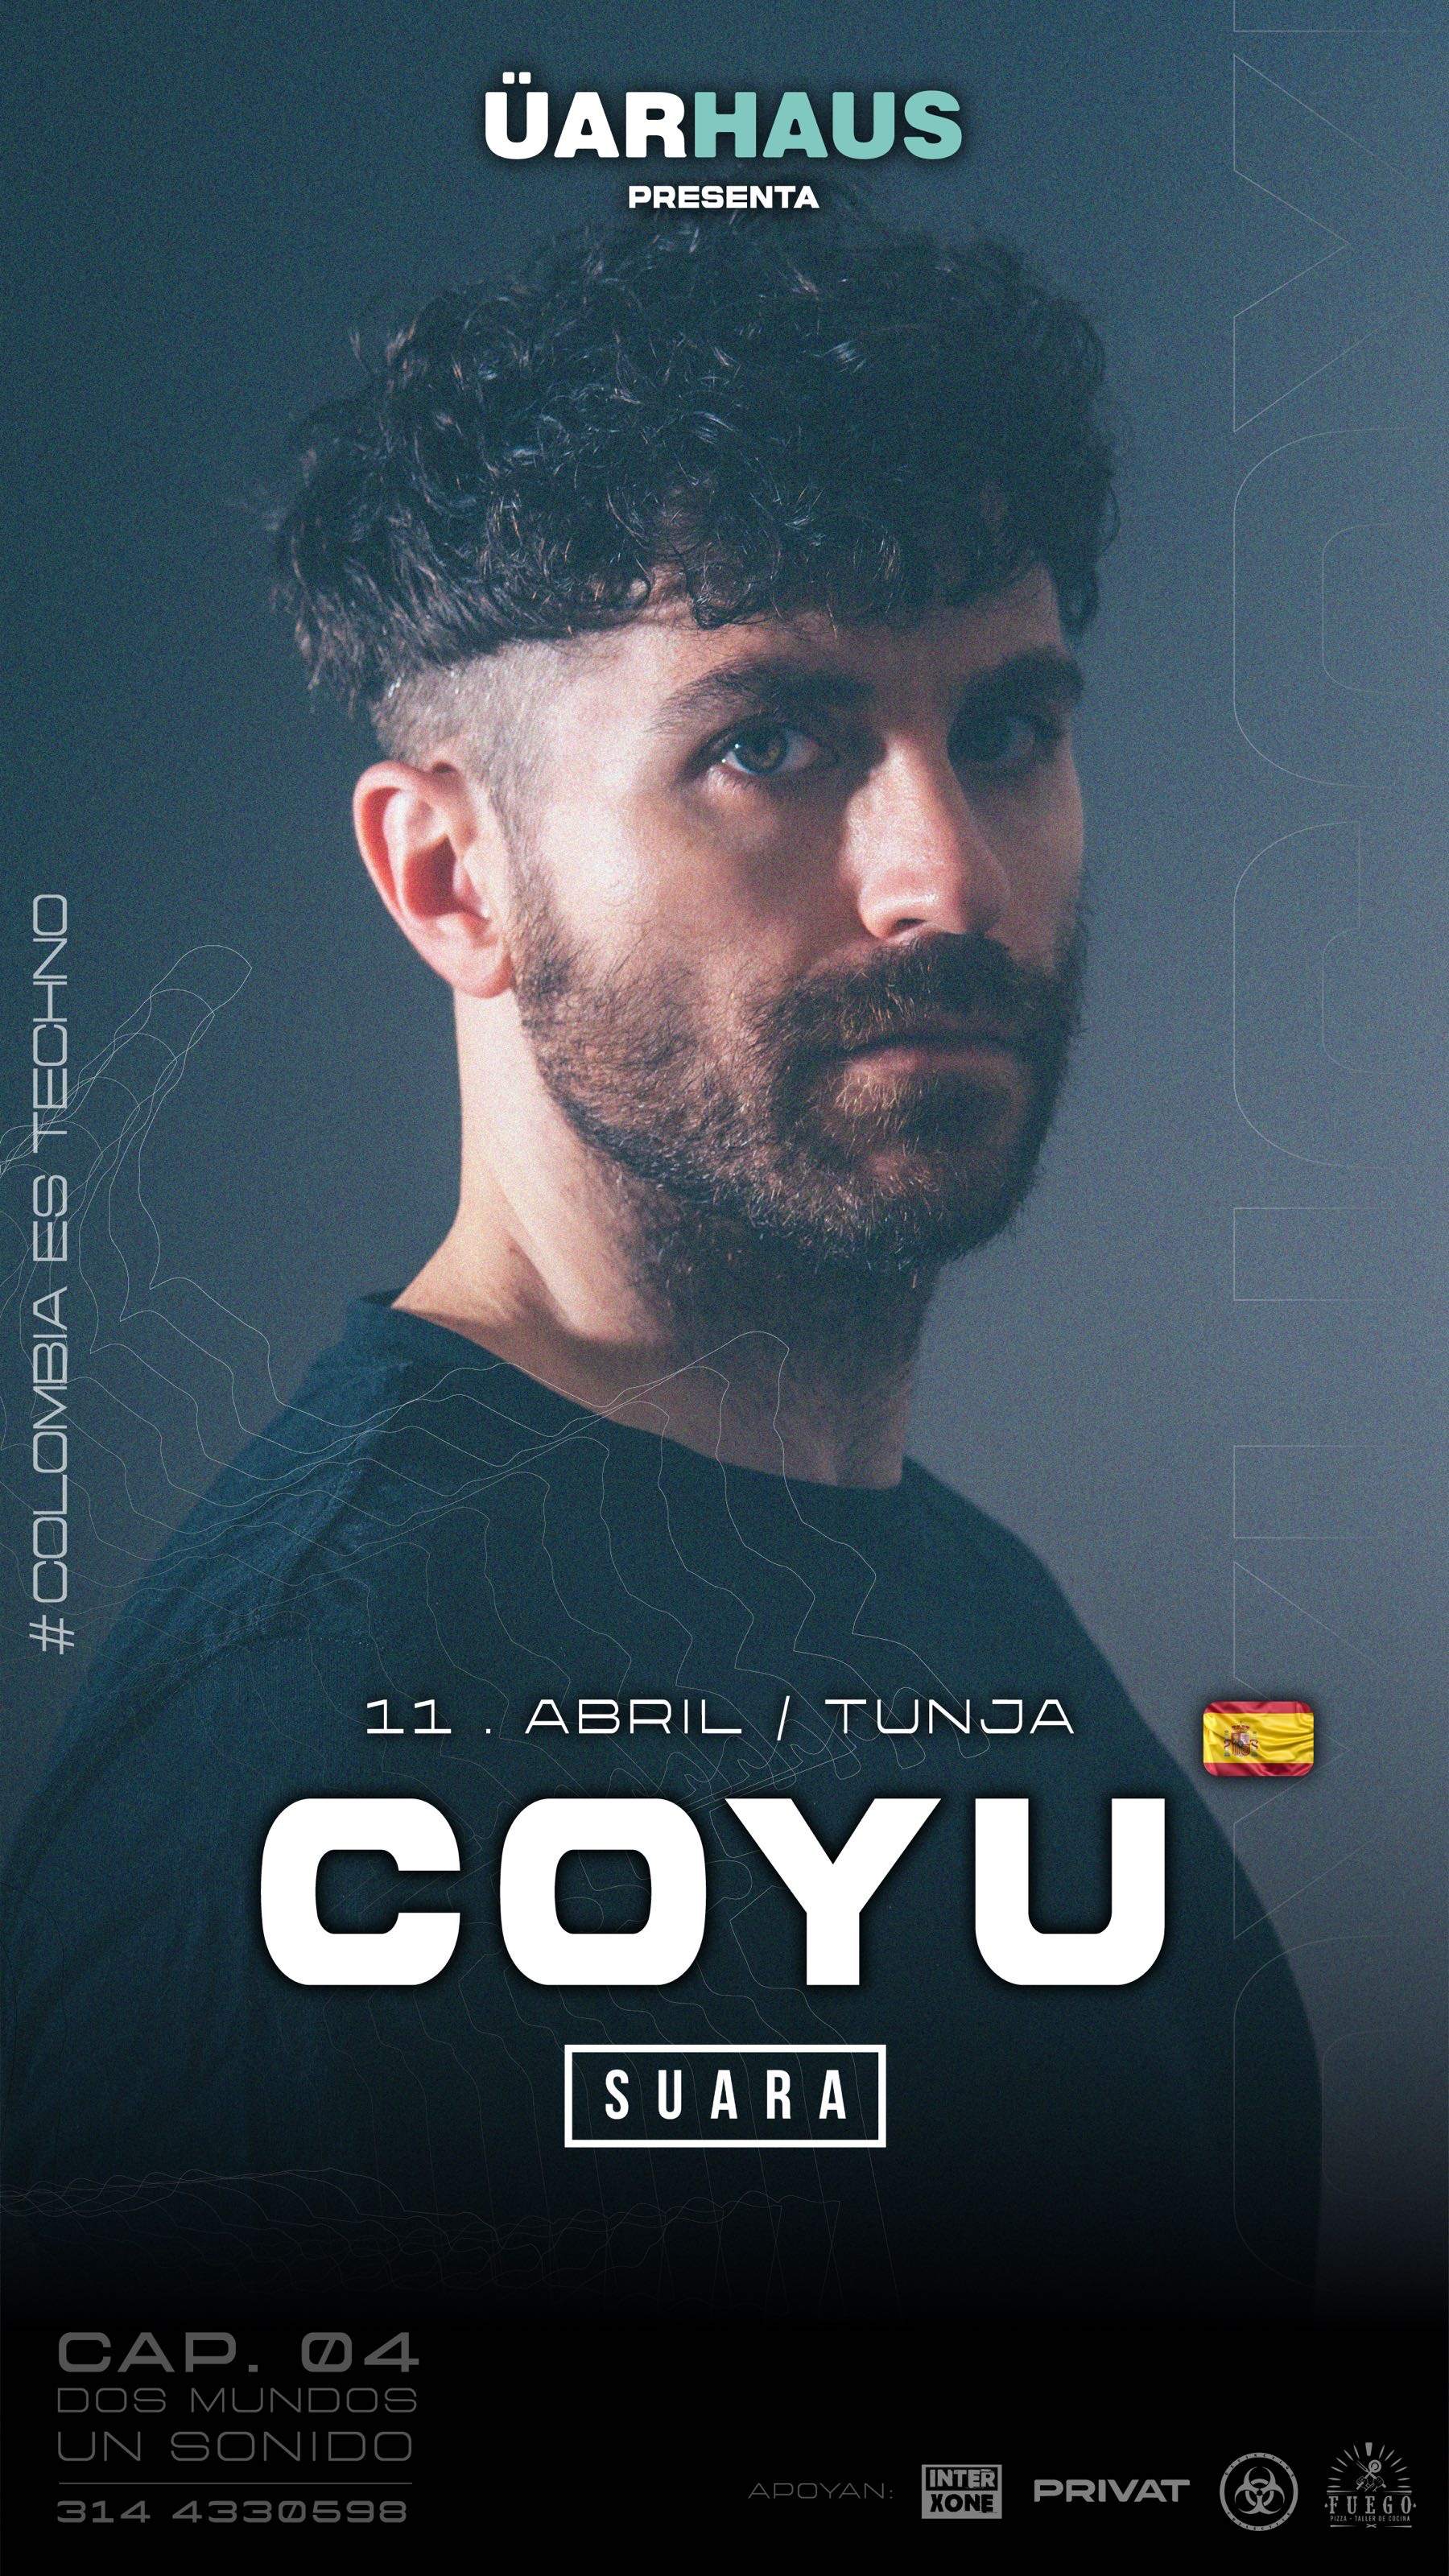 Üarhaus presenta: Coyu & Deraout full extended - フライヤー表